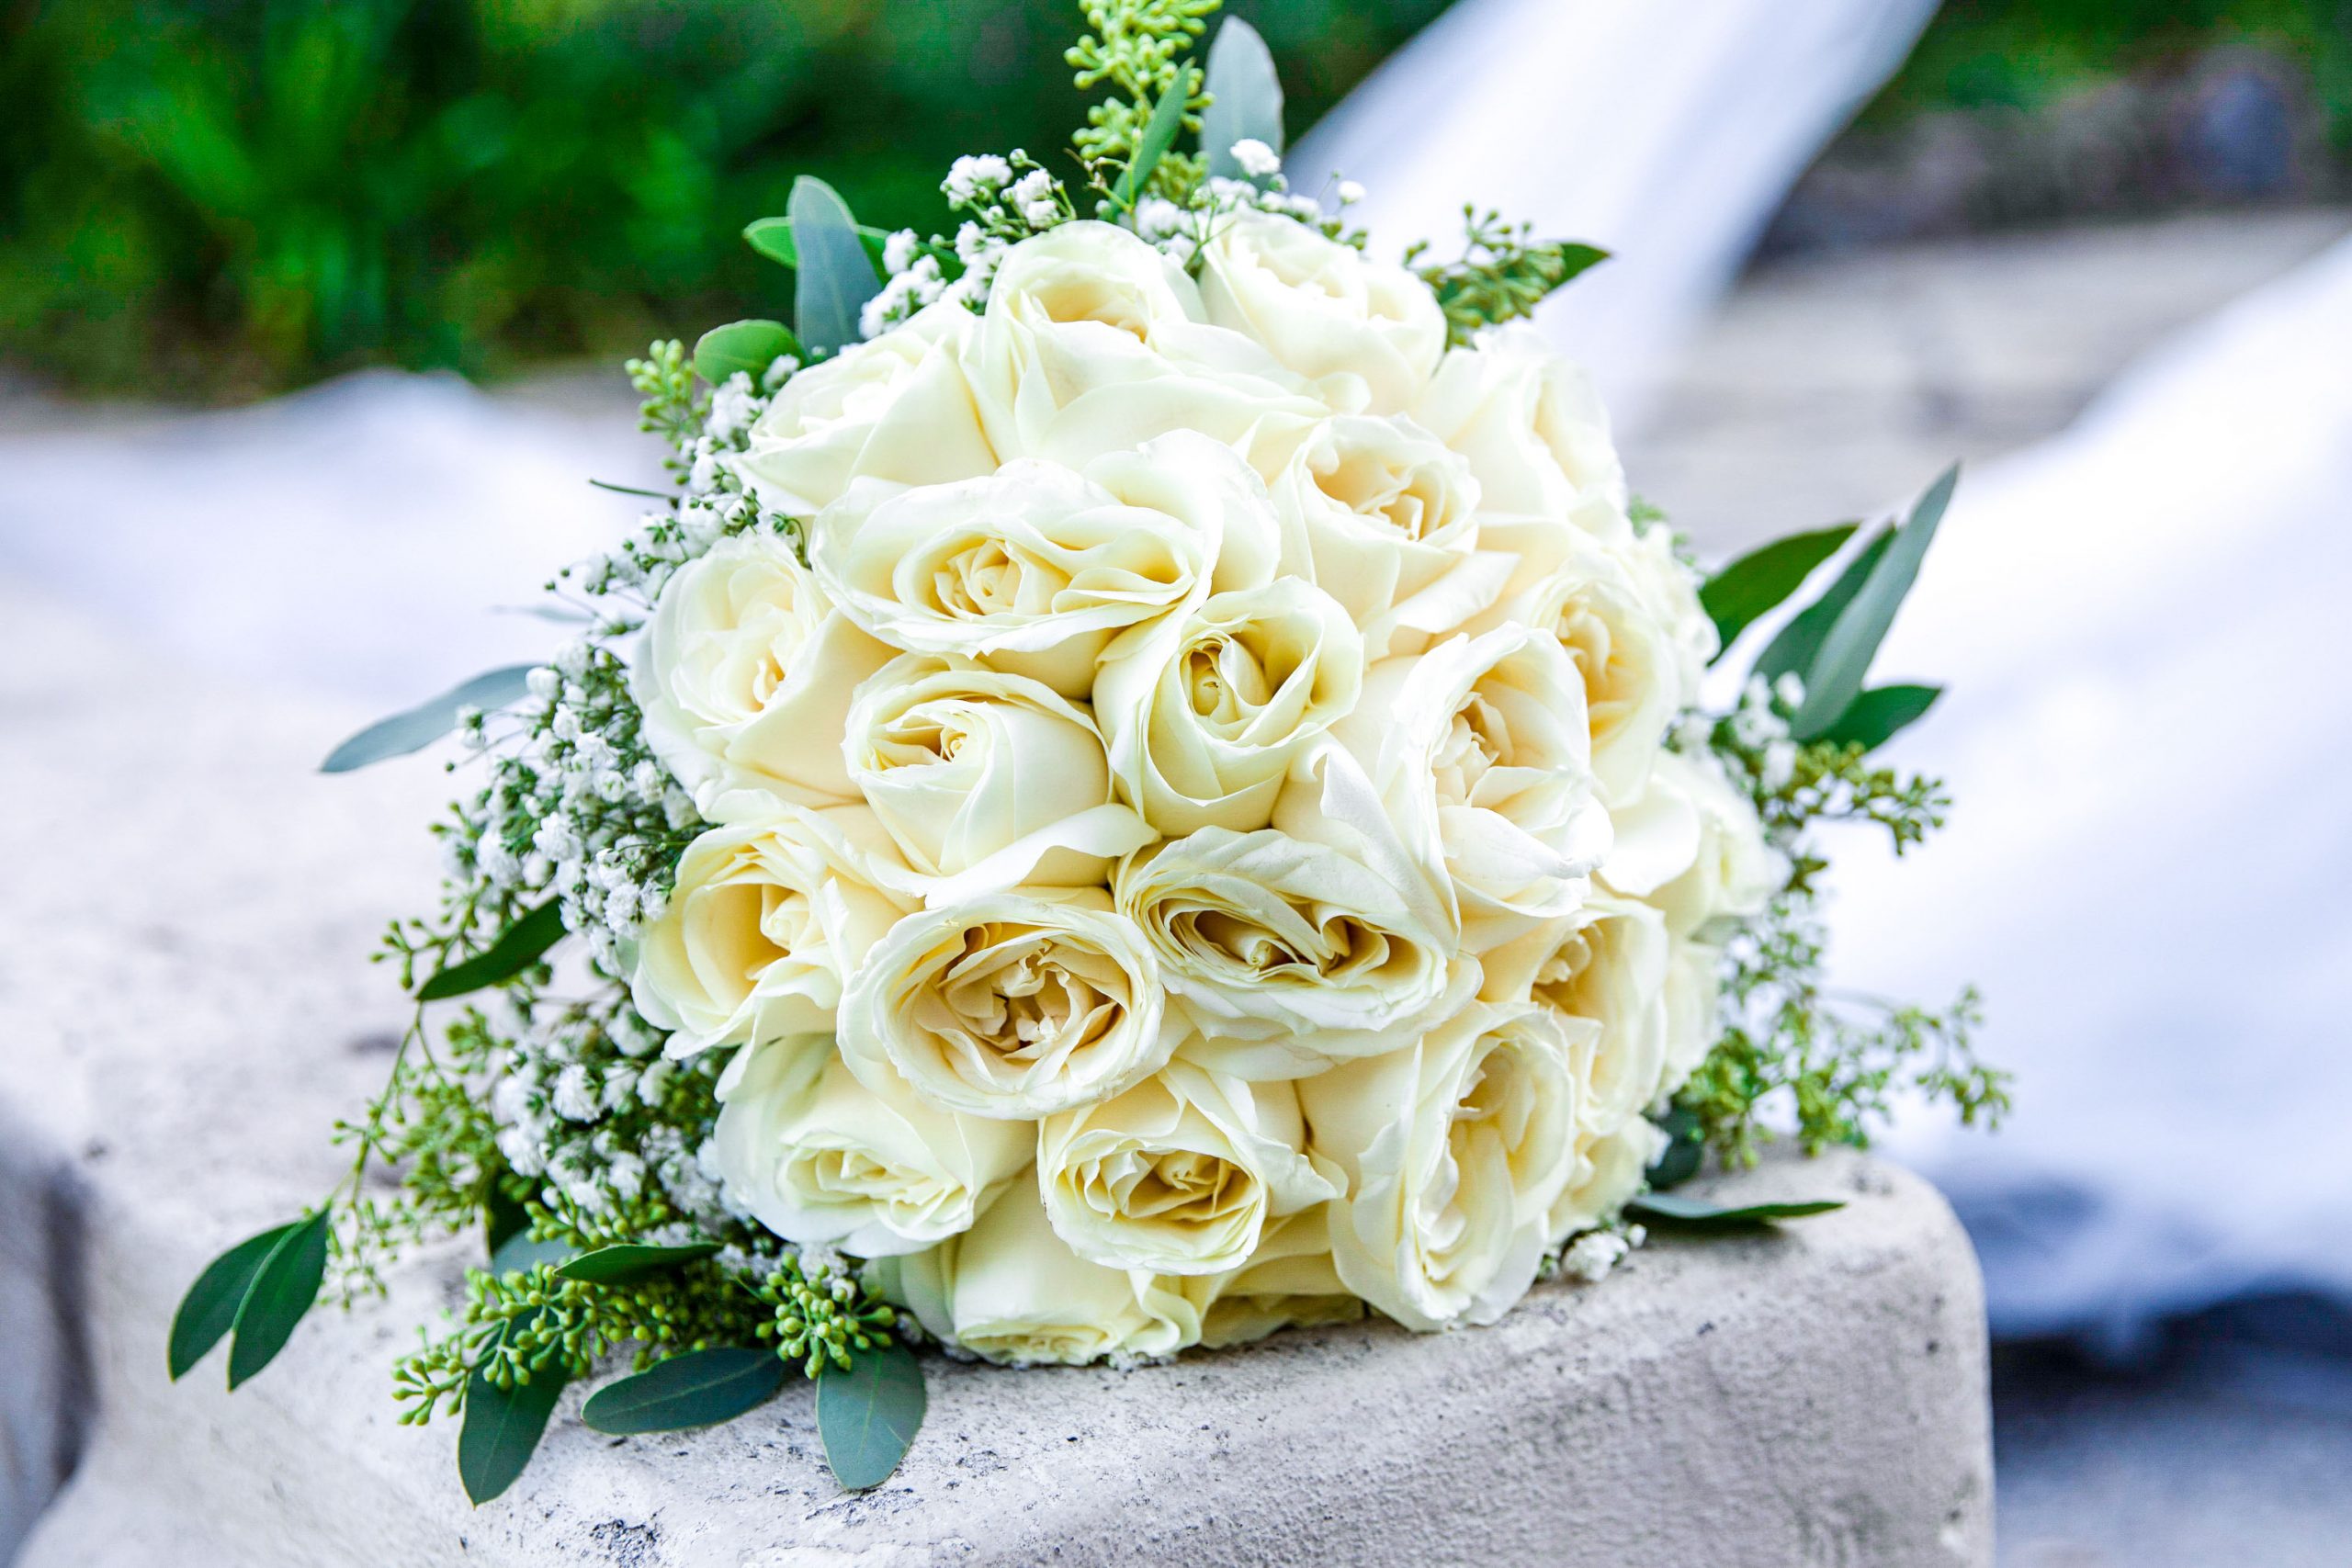 Exquisite and Stylish Wedding Flower Trends for 2022 - byDesign Photo + Film